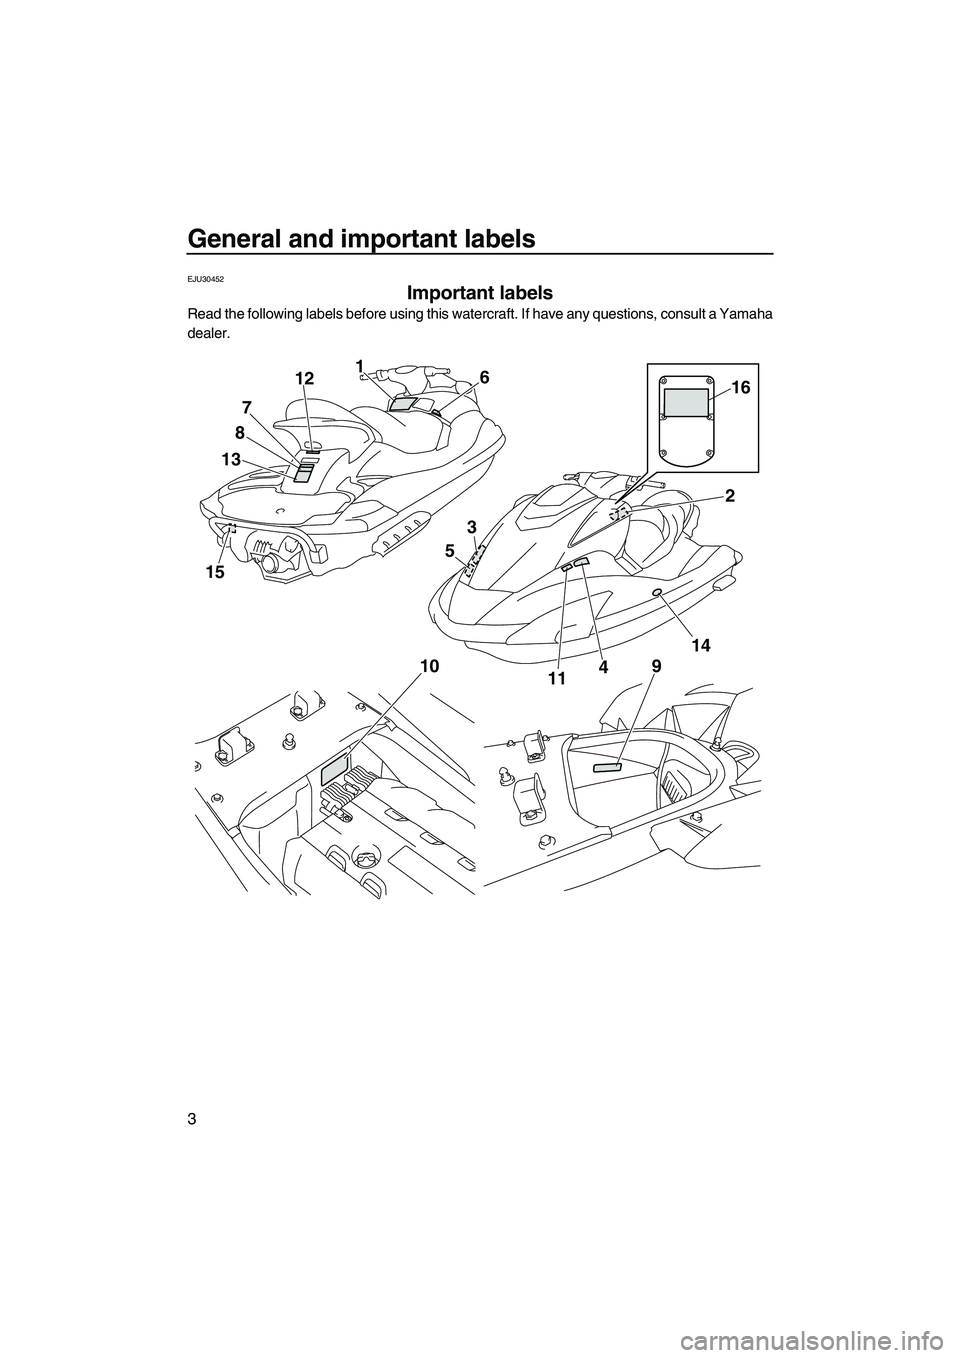 YAMAHA SVHO CRUISER 2010  Owners Manual General and important labels
3
EJU30452
Important labels 
Read the following labels before using this watercraft. If have any questions, consult a Yamaha
dealer.
15
1387121
6
4
10914216
3
511
UF1W72E0